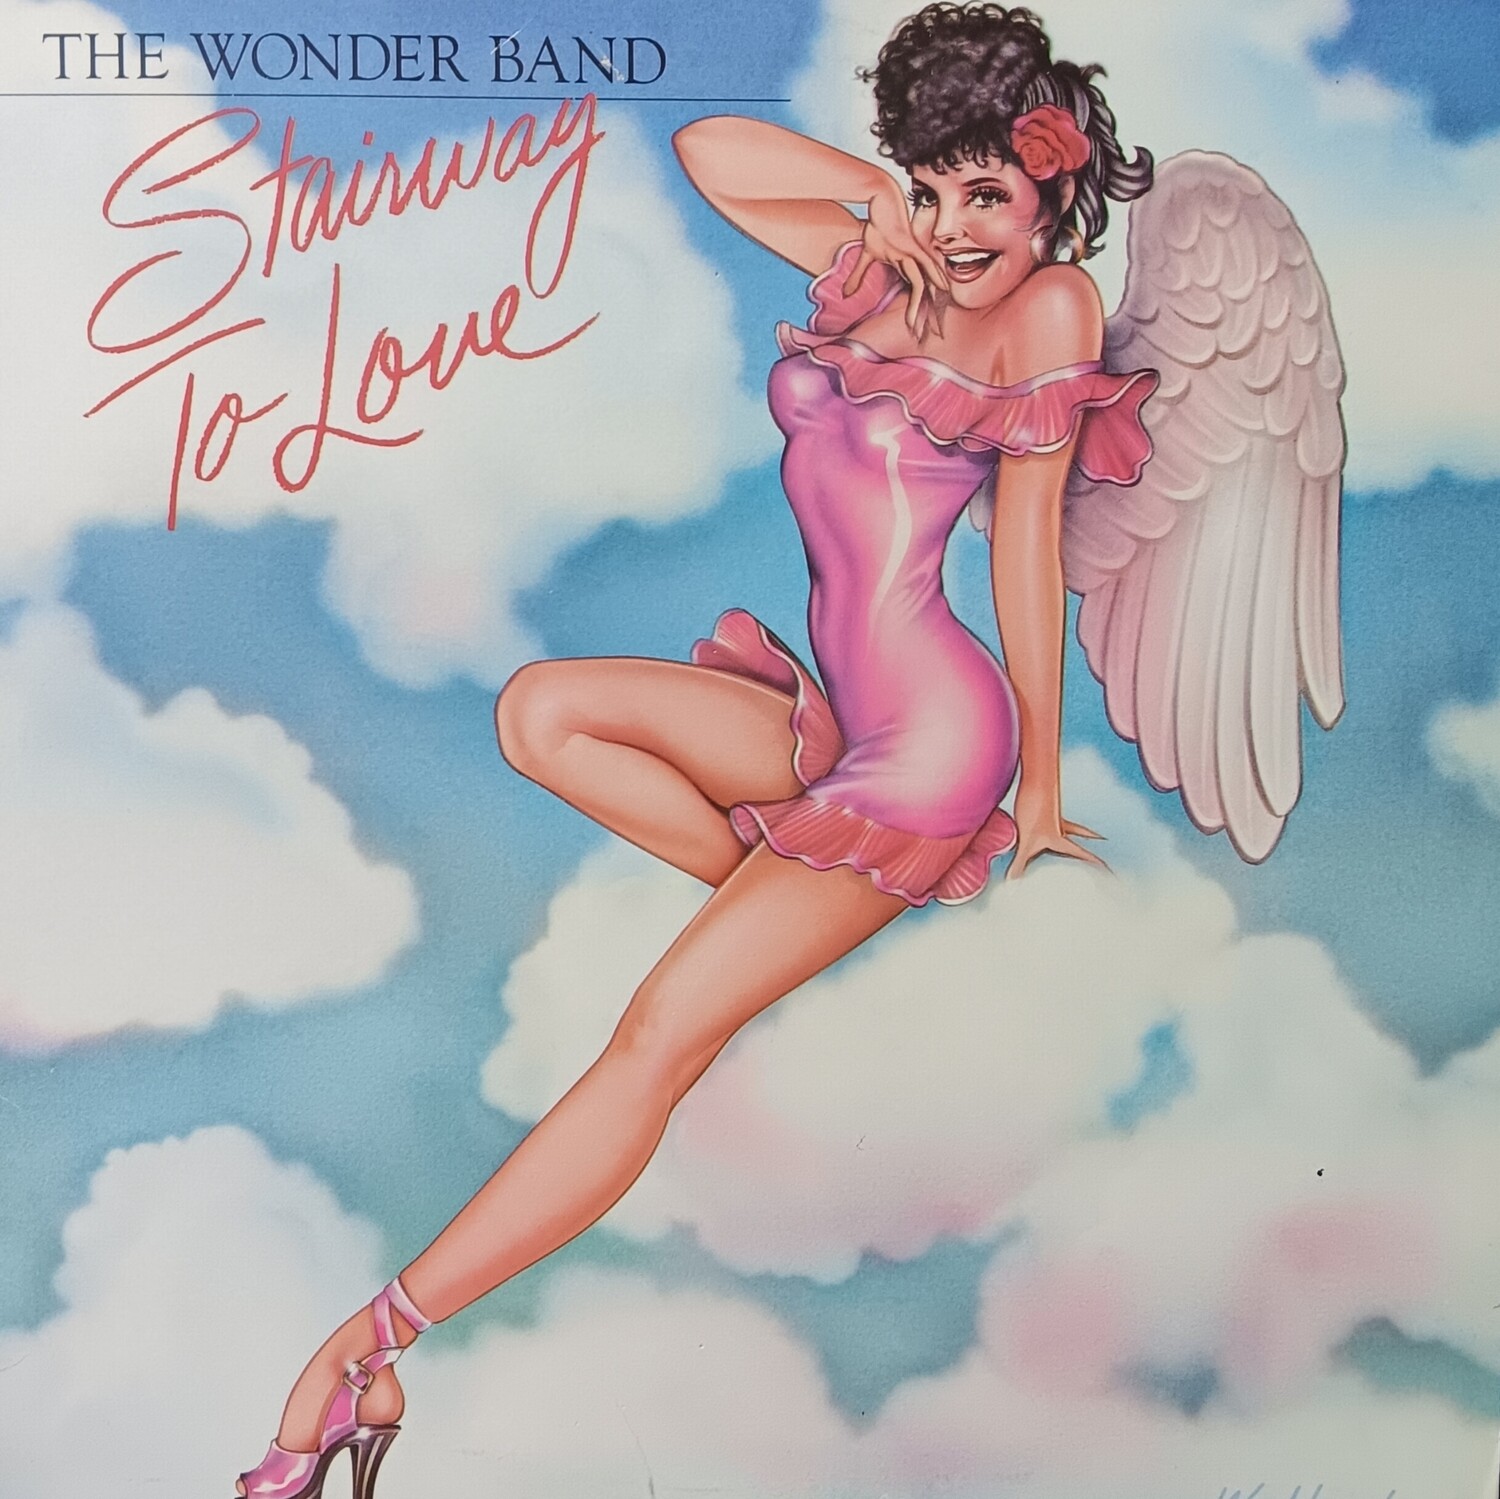 THE WONDER BAND - Stairway to love